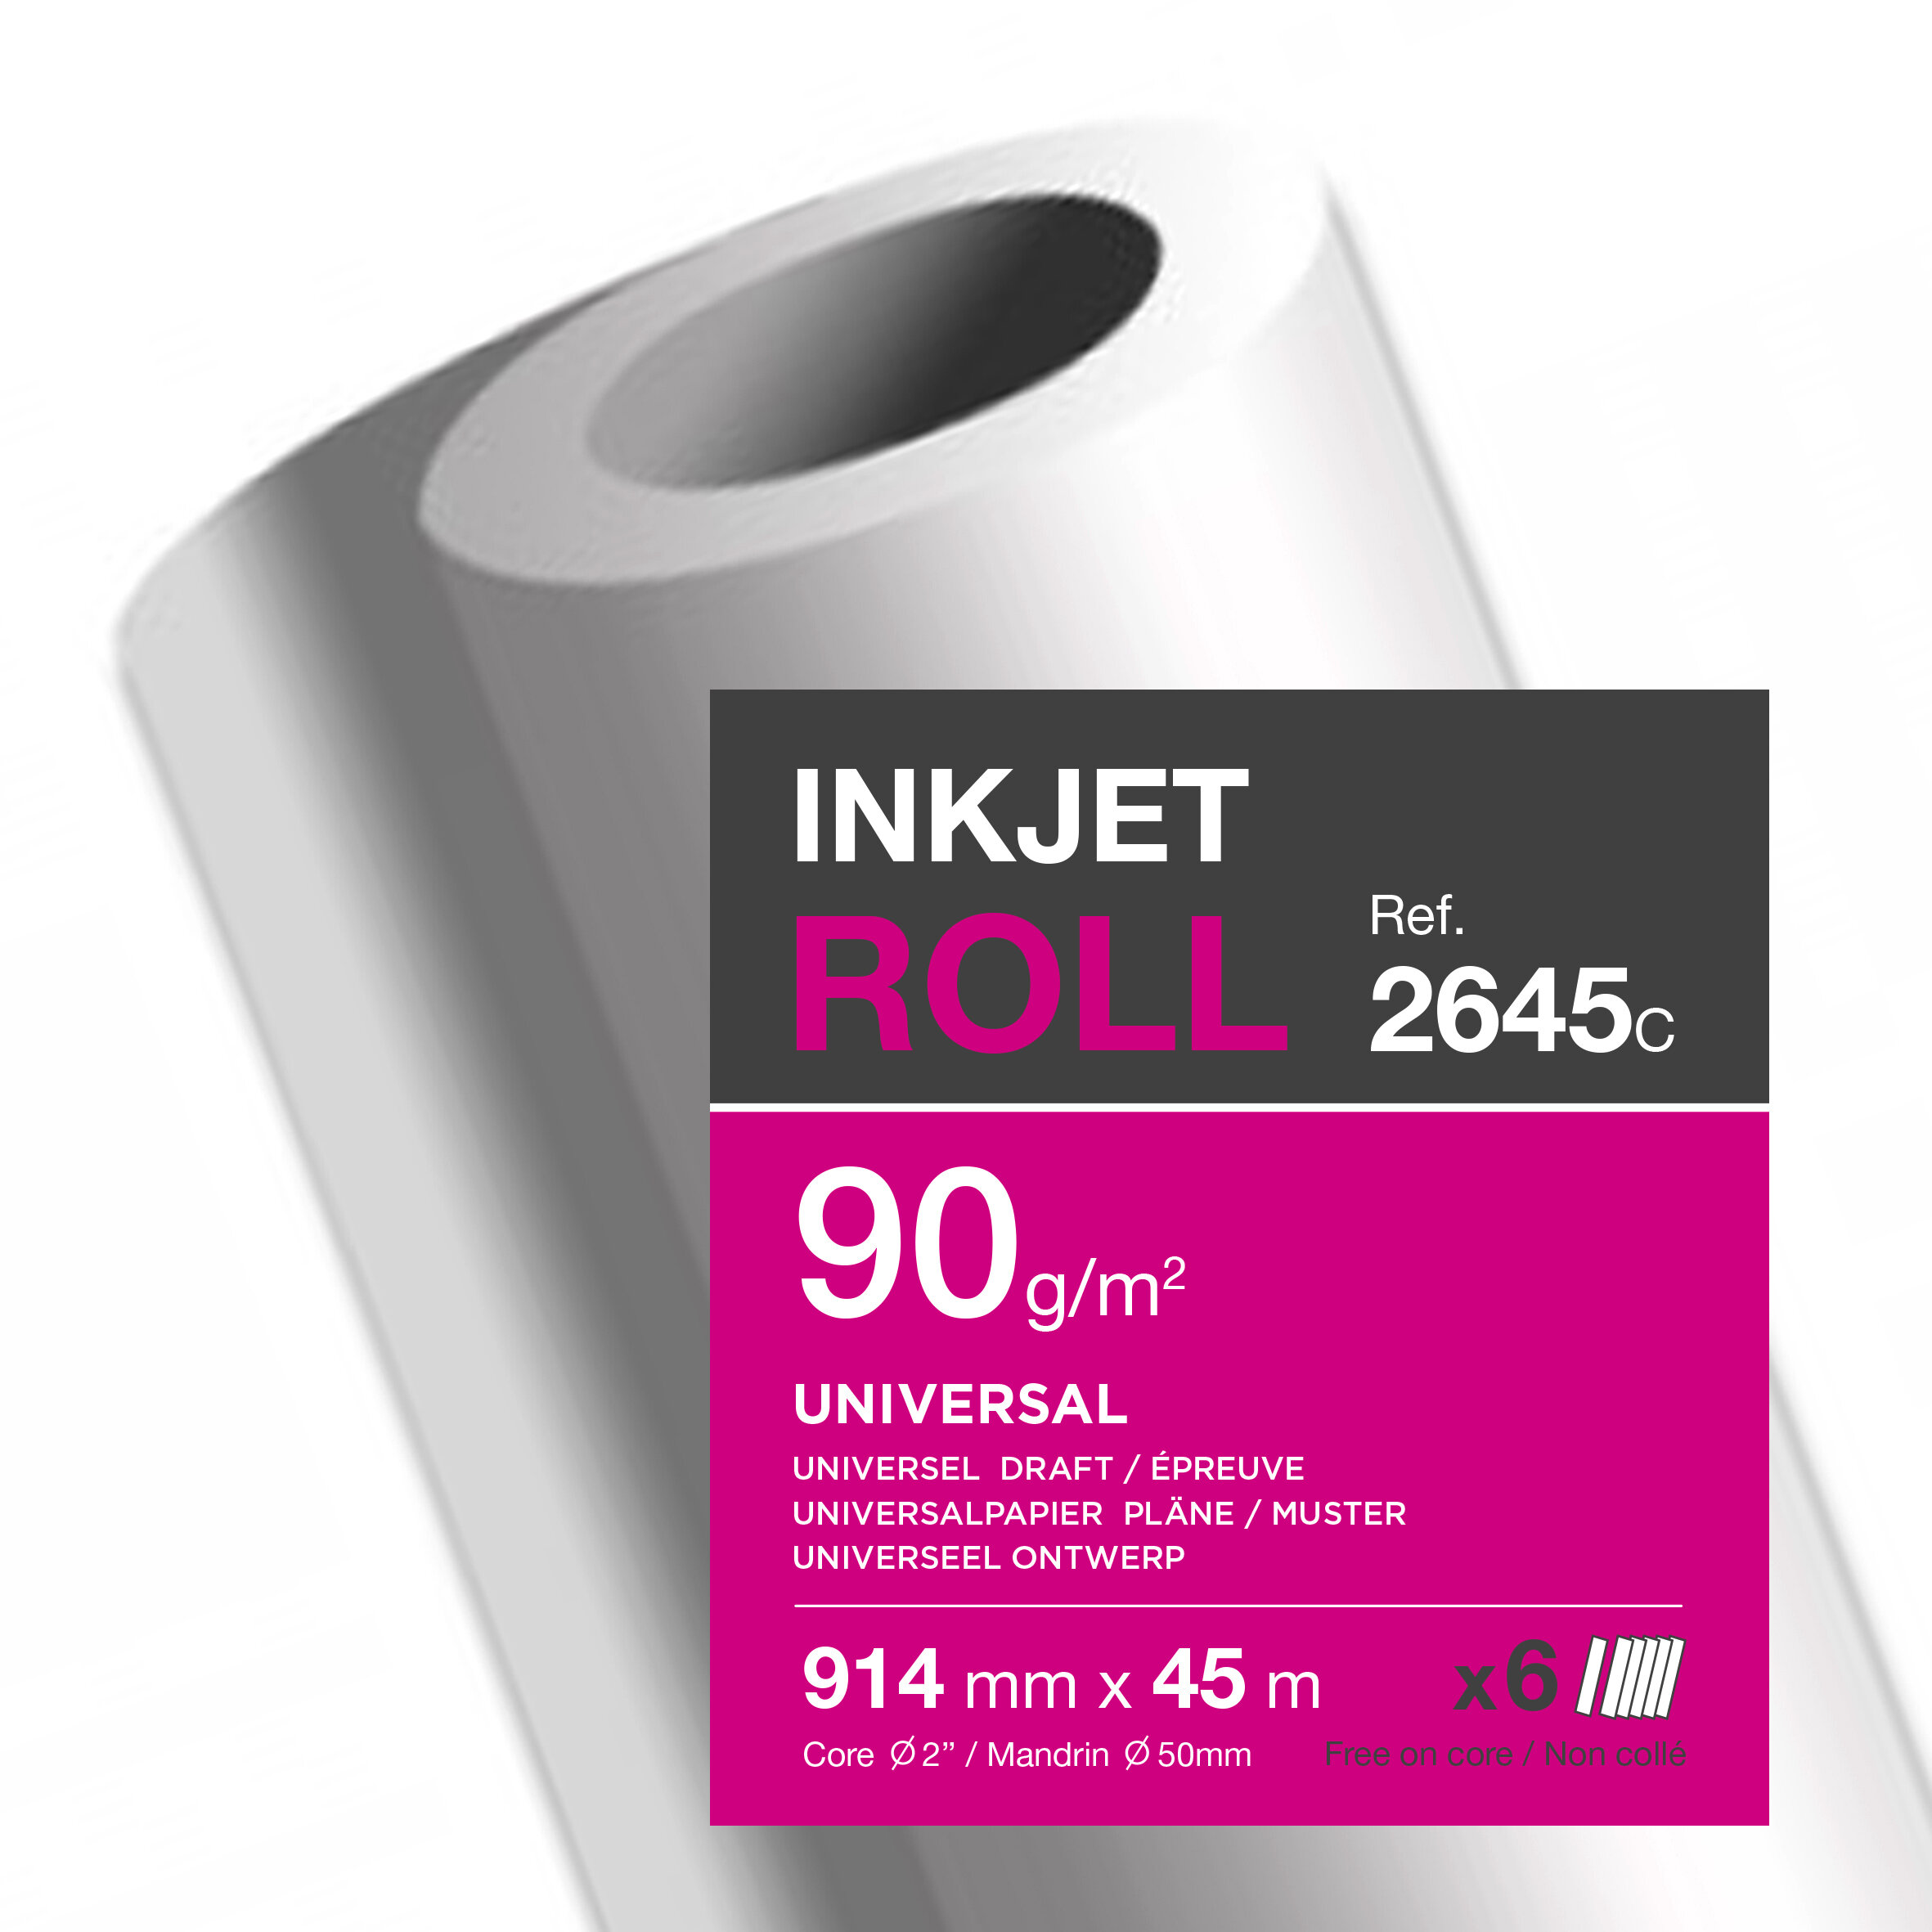 Clairefontaine inkjet rollen wit 2645 90g/m² 914 mm x 45 M 50 mm